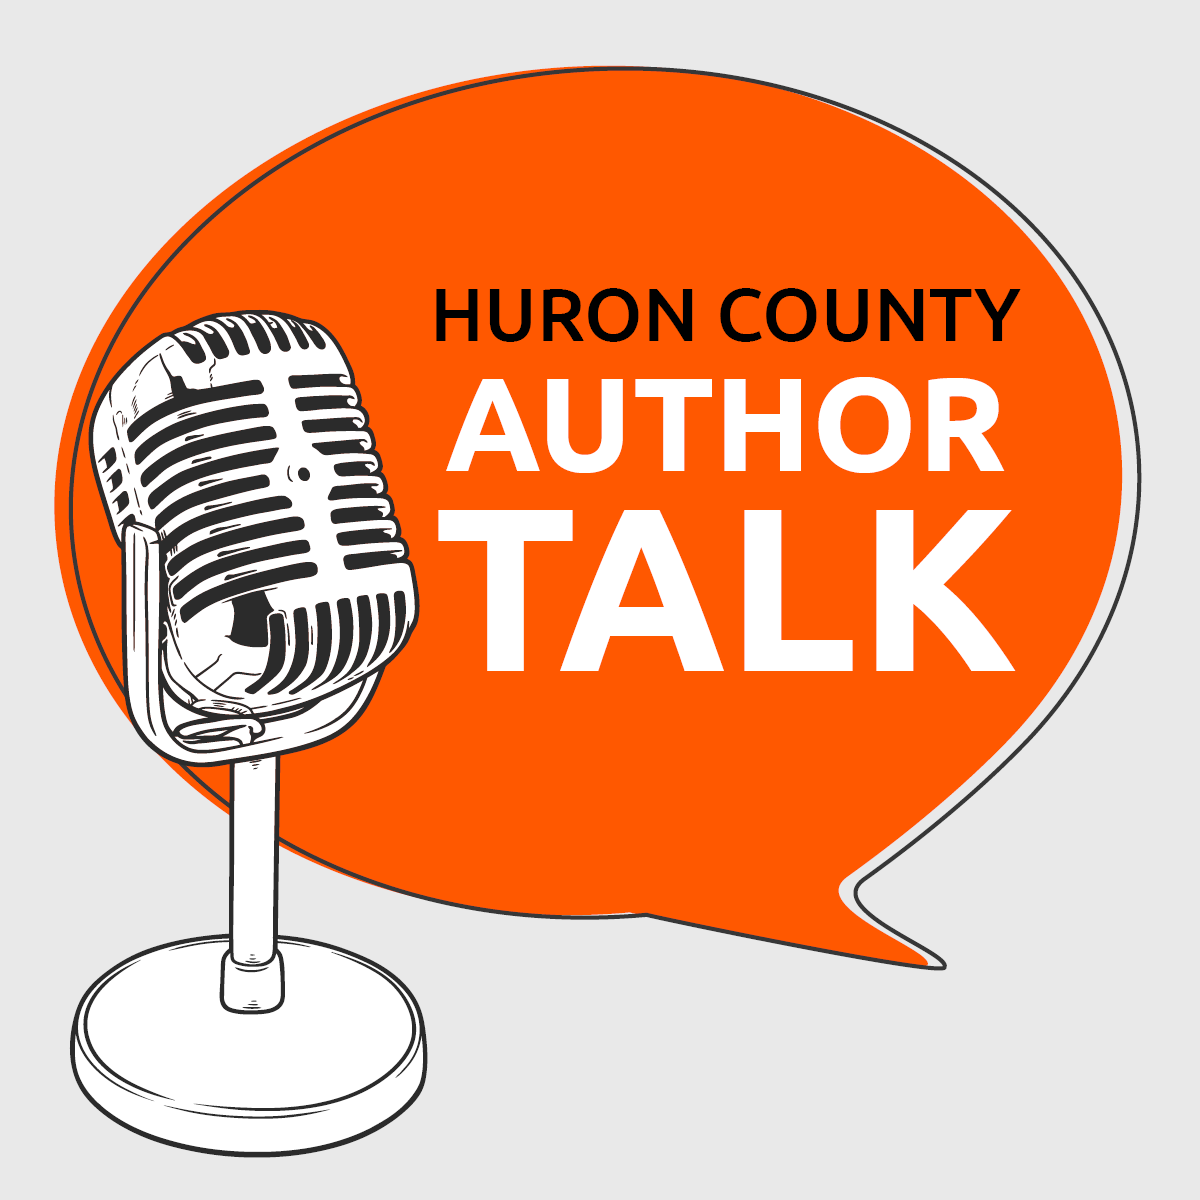 Illustration of a microphone in a speech bubble with text promoting Huron County Author Talk